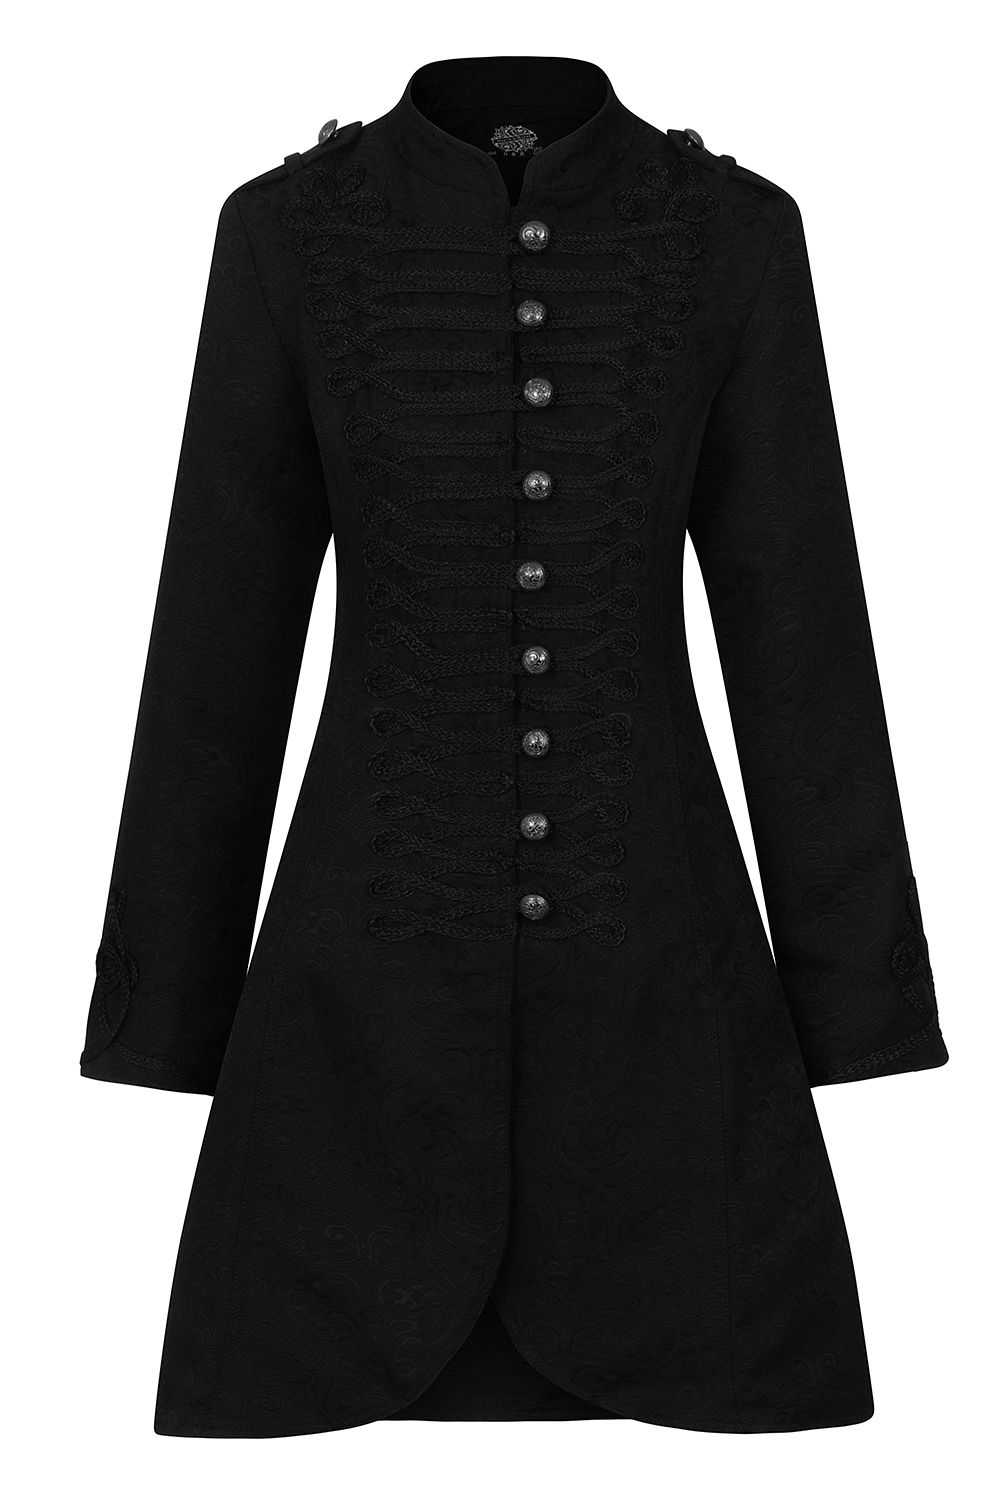 Tailored Military Style Coat in Black - Hearts & Roses London